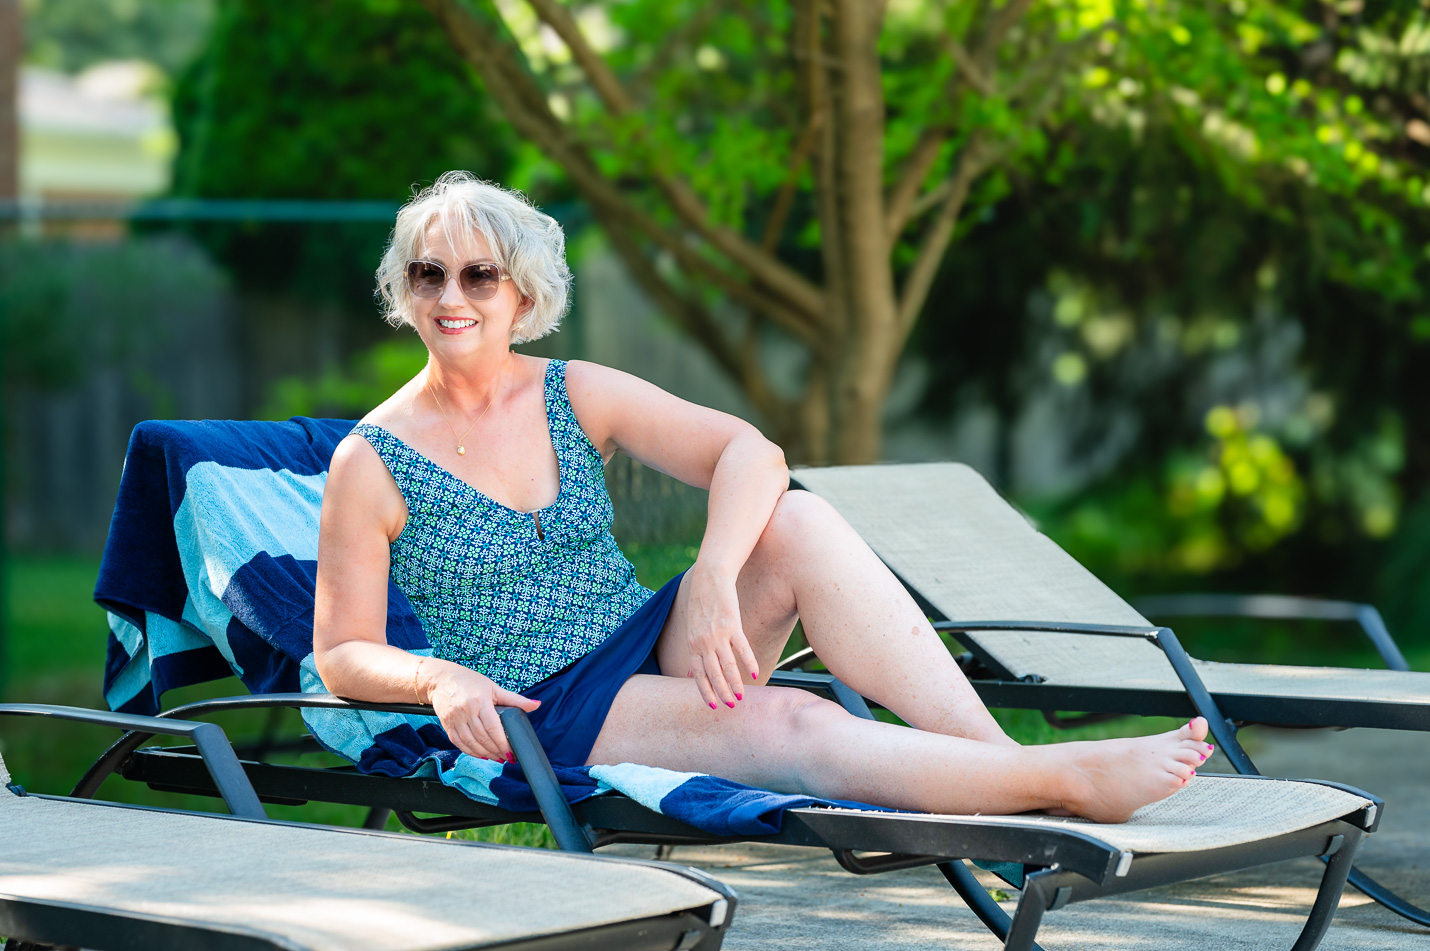 Swimsuits and Accessories for the Active Woman Over 50